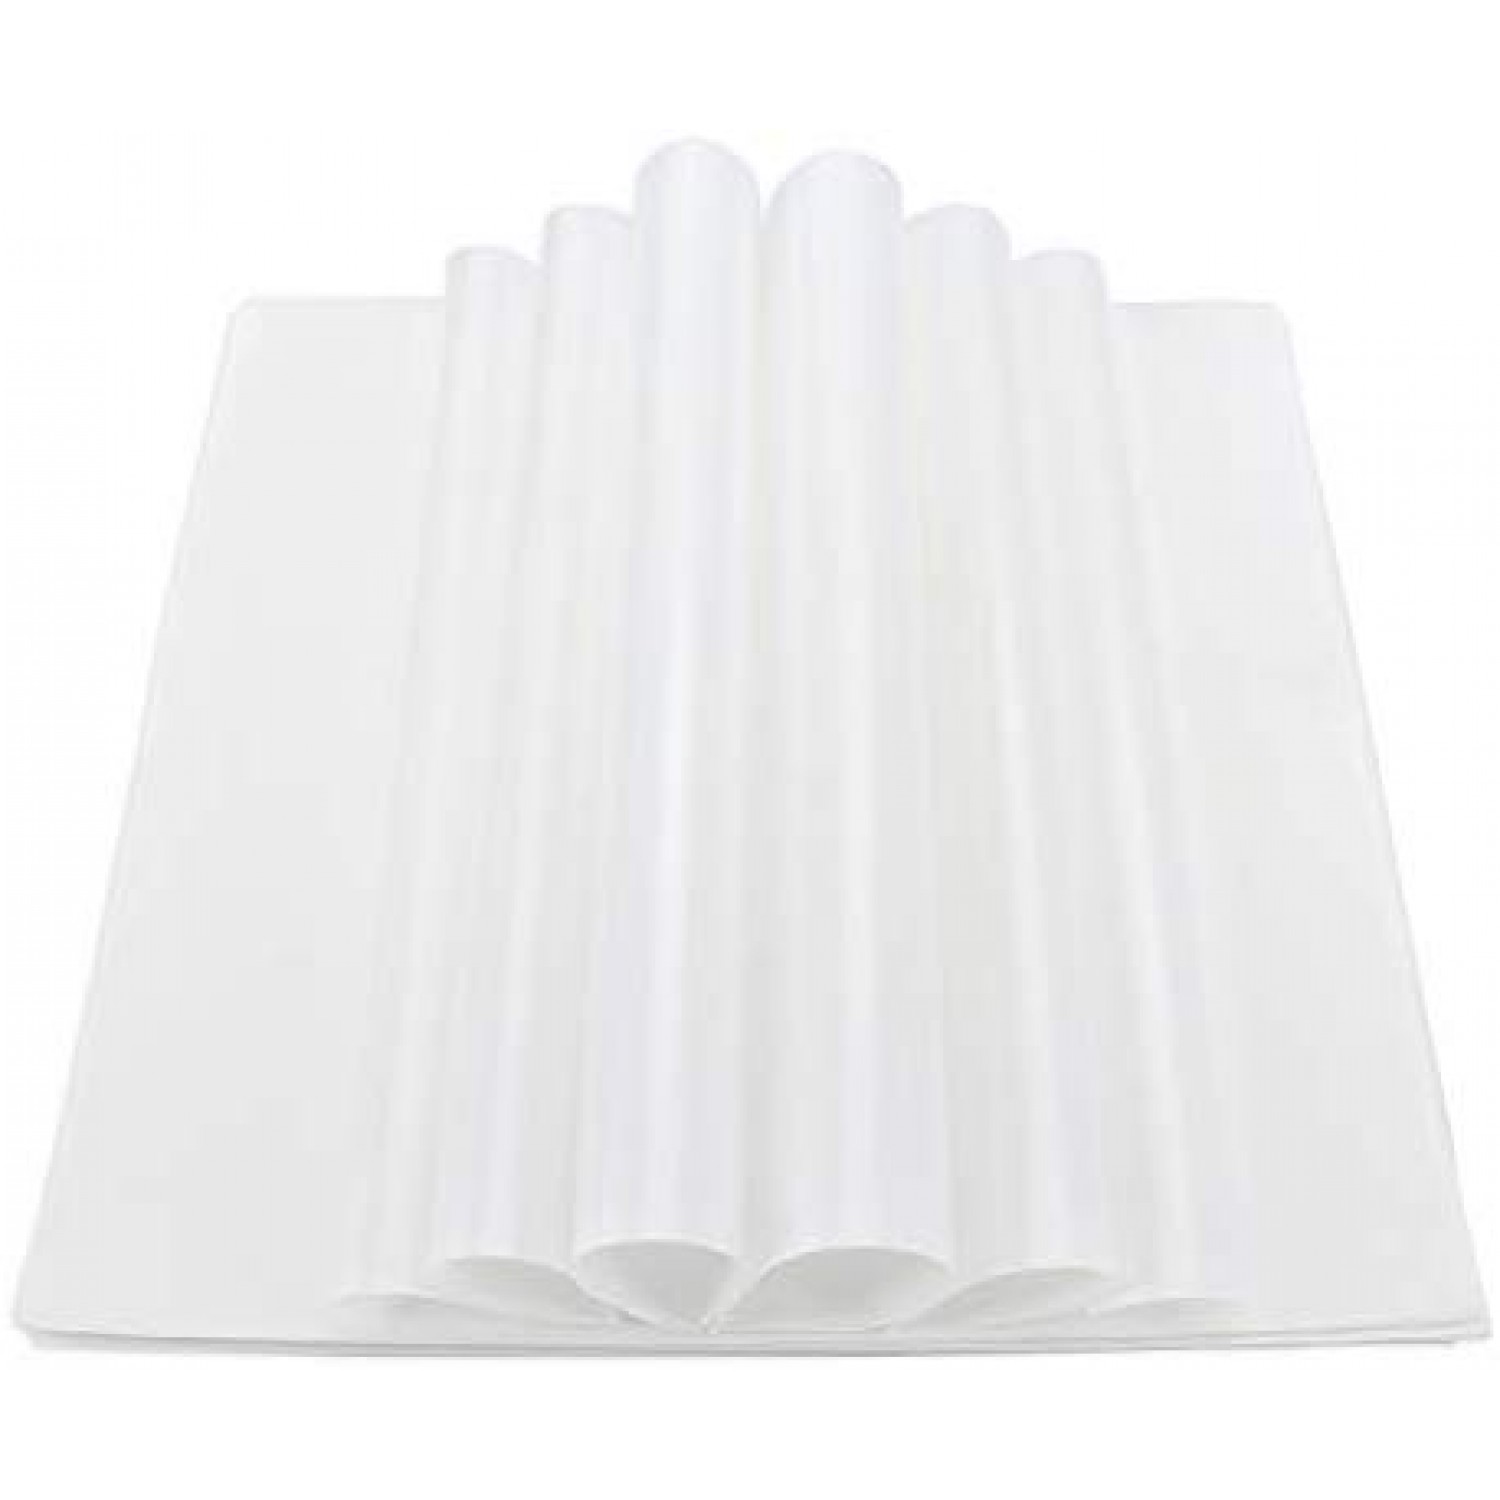 100pcs Wax Paper Sheets for Food, Basket Liners Food Picnic Paper Sheets Greaseproof Deli Wrapping Sheets, 8.6 x 8.6 inch (White)